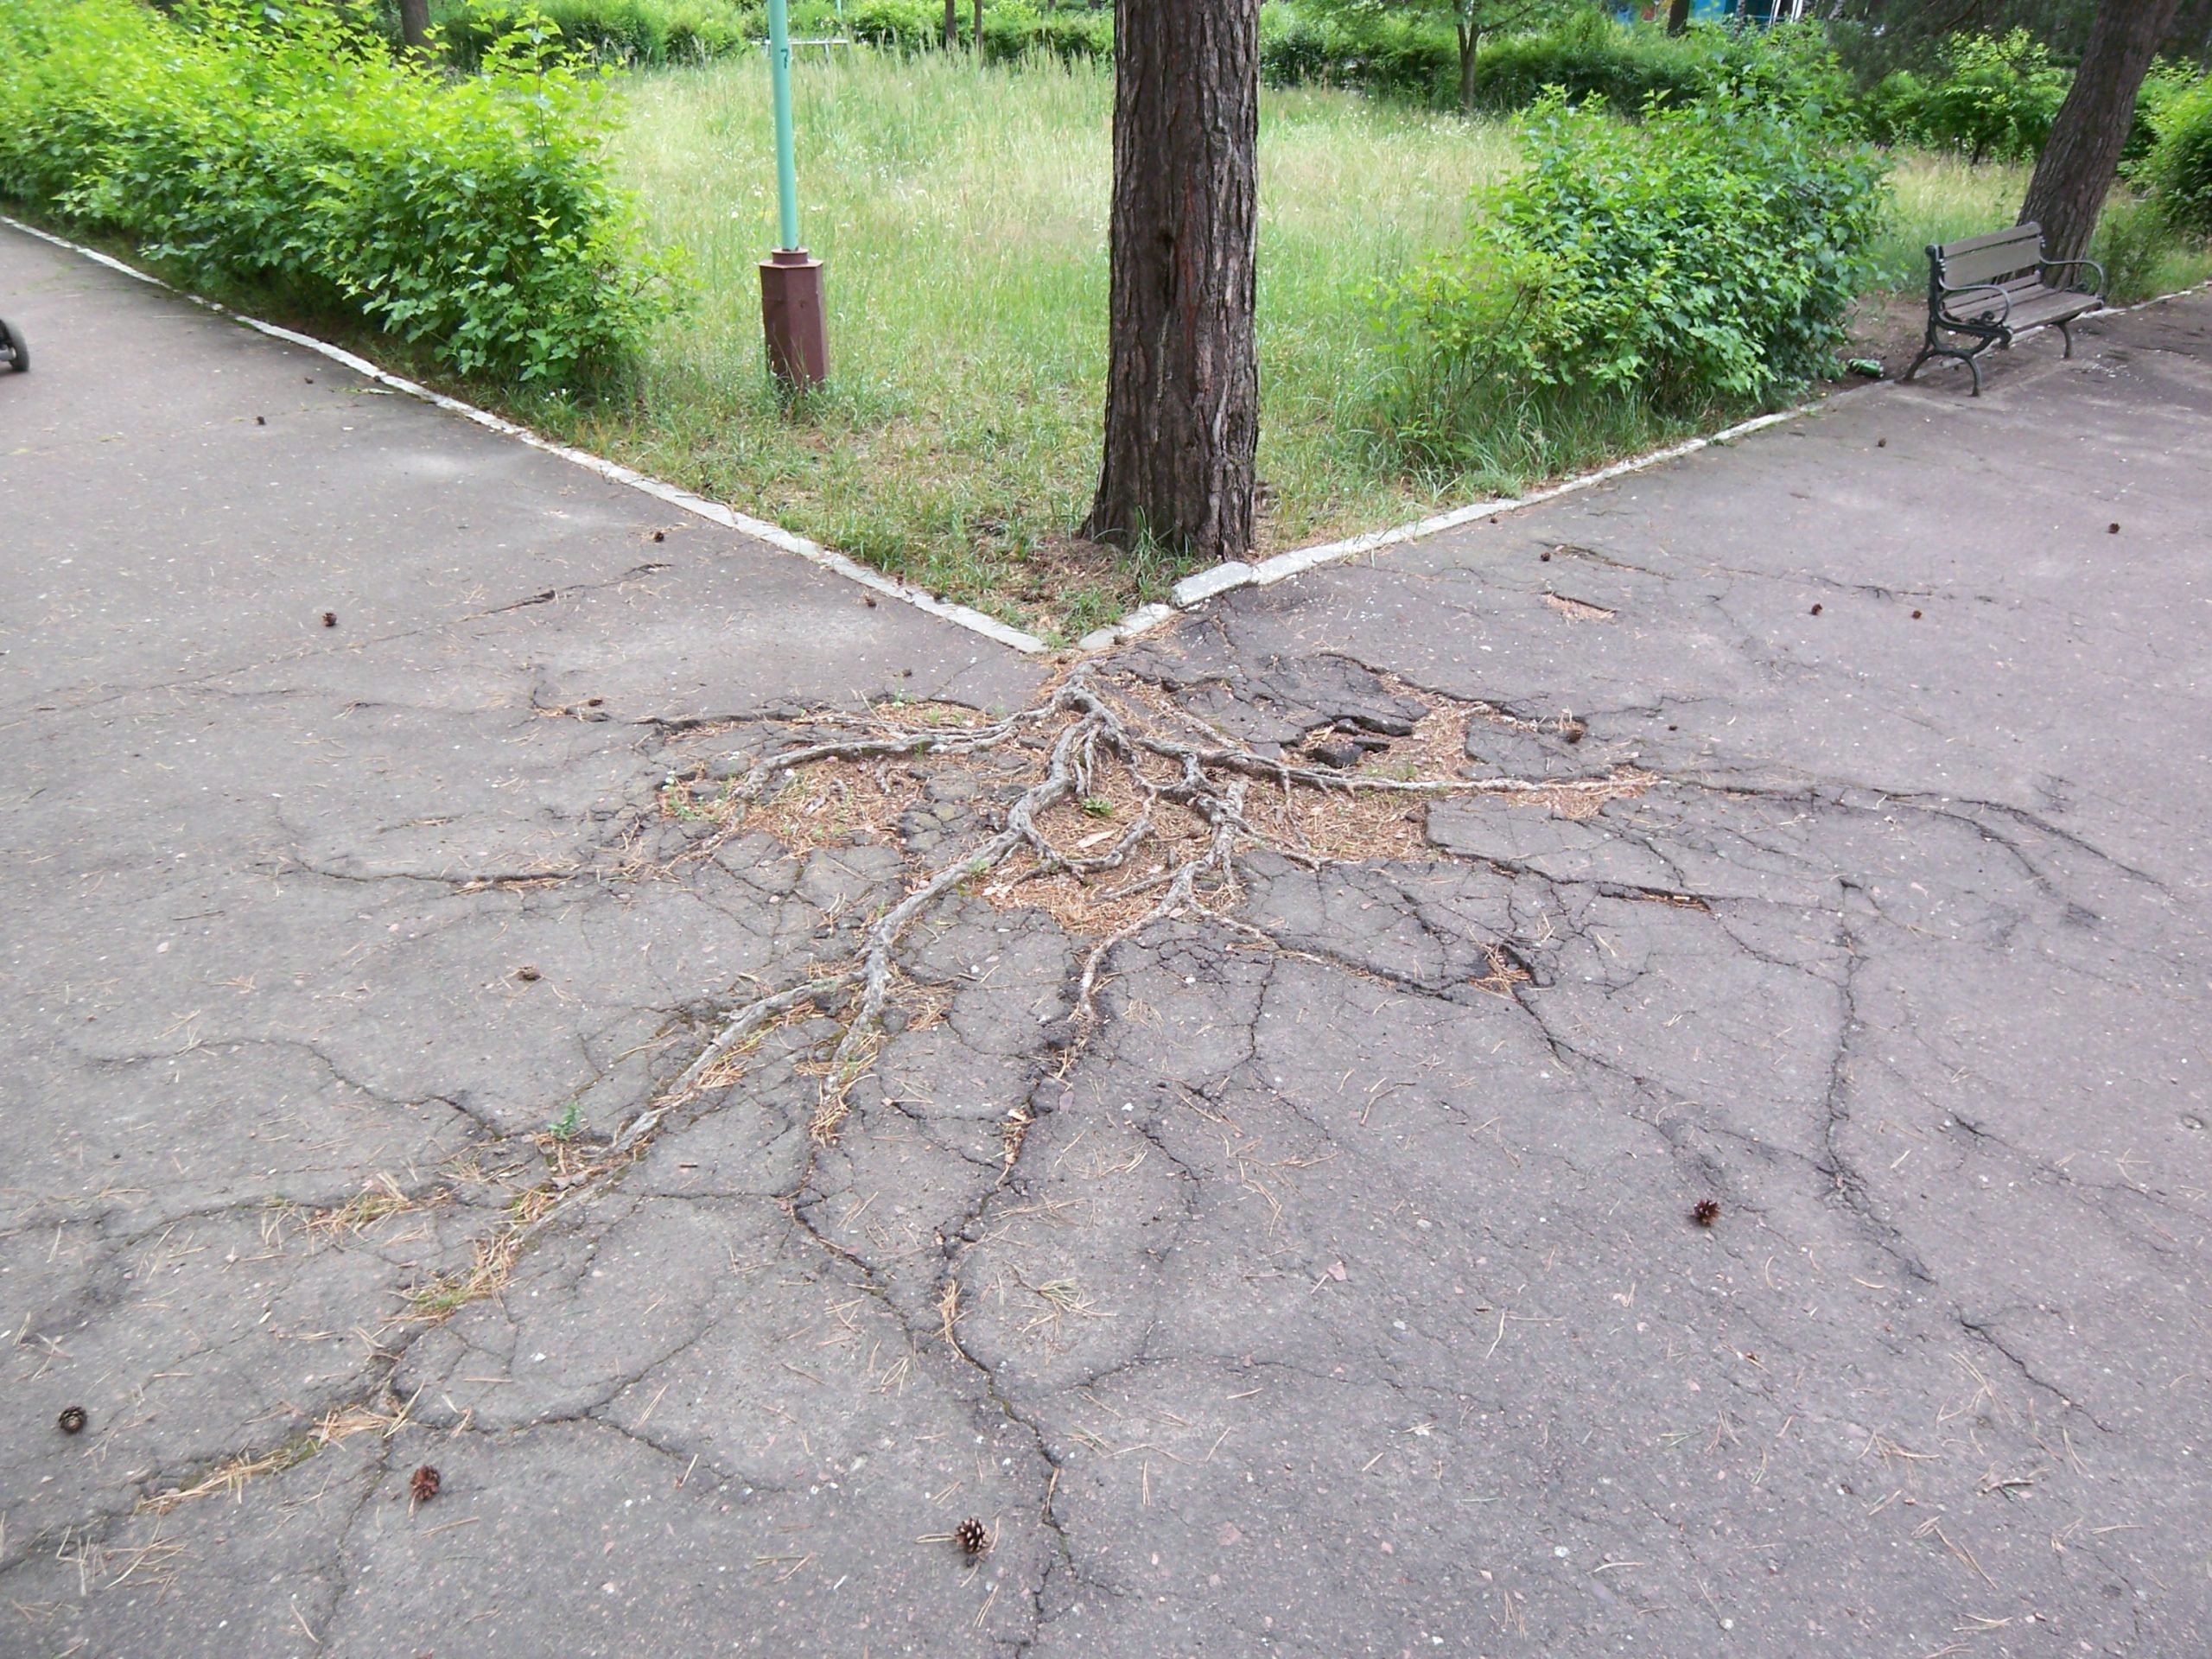 Roots of a tree are visible rising and breaking through asphalt.